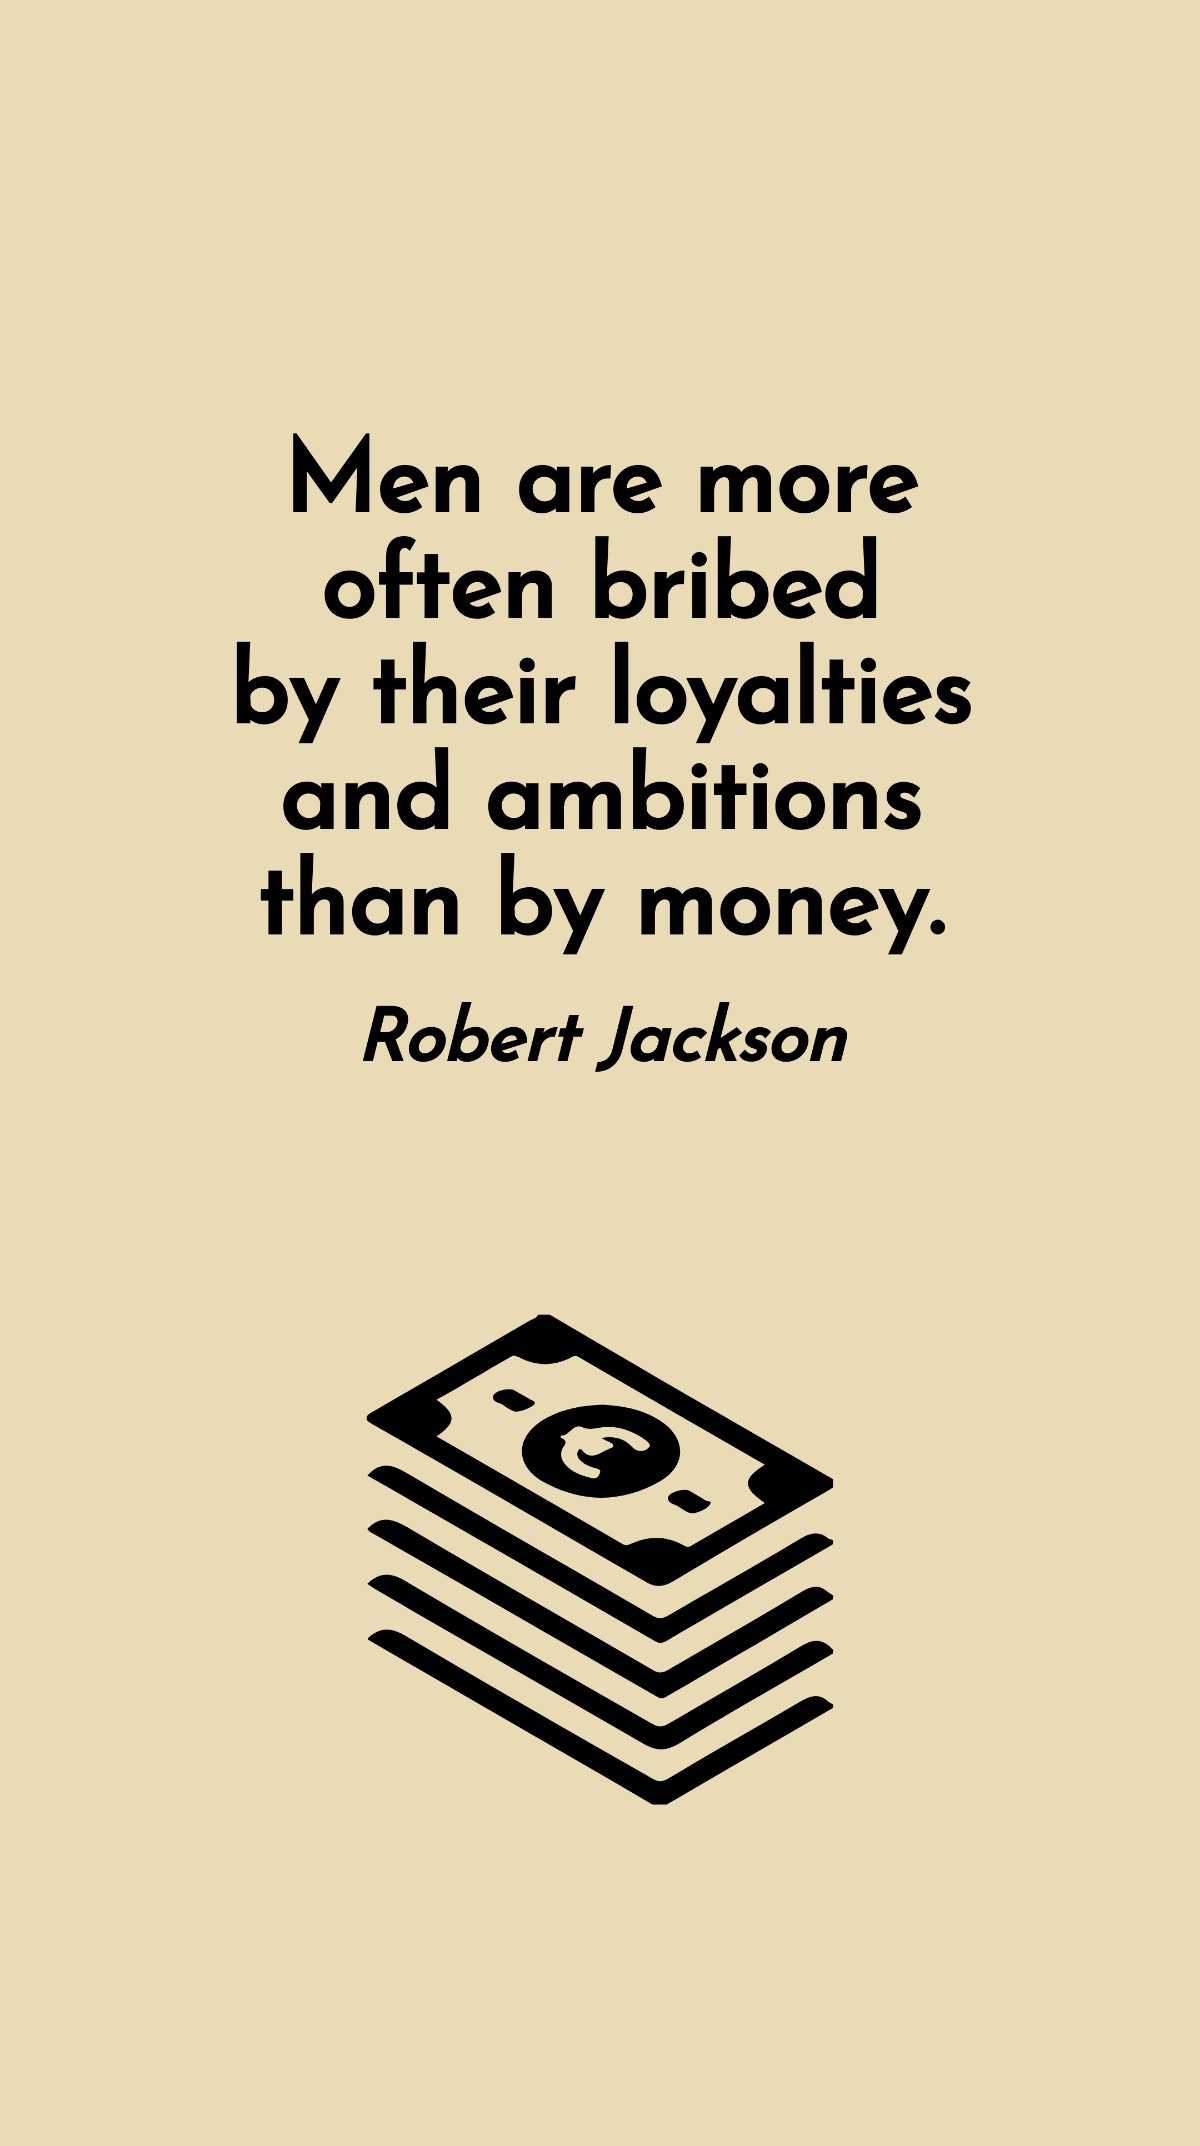 Robert Jackson - Men are more often bribed by their loyalties and ambitions than by money. Template